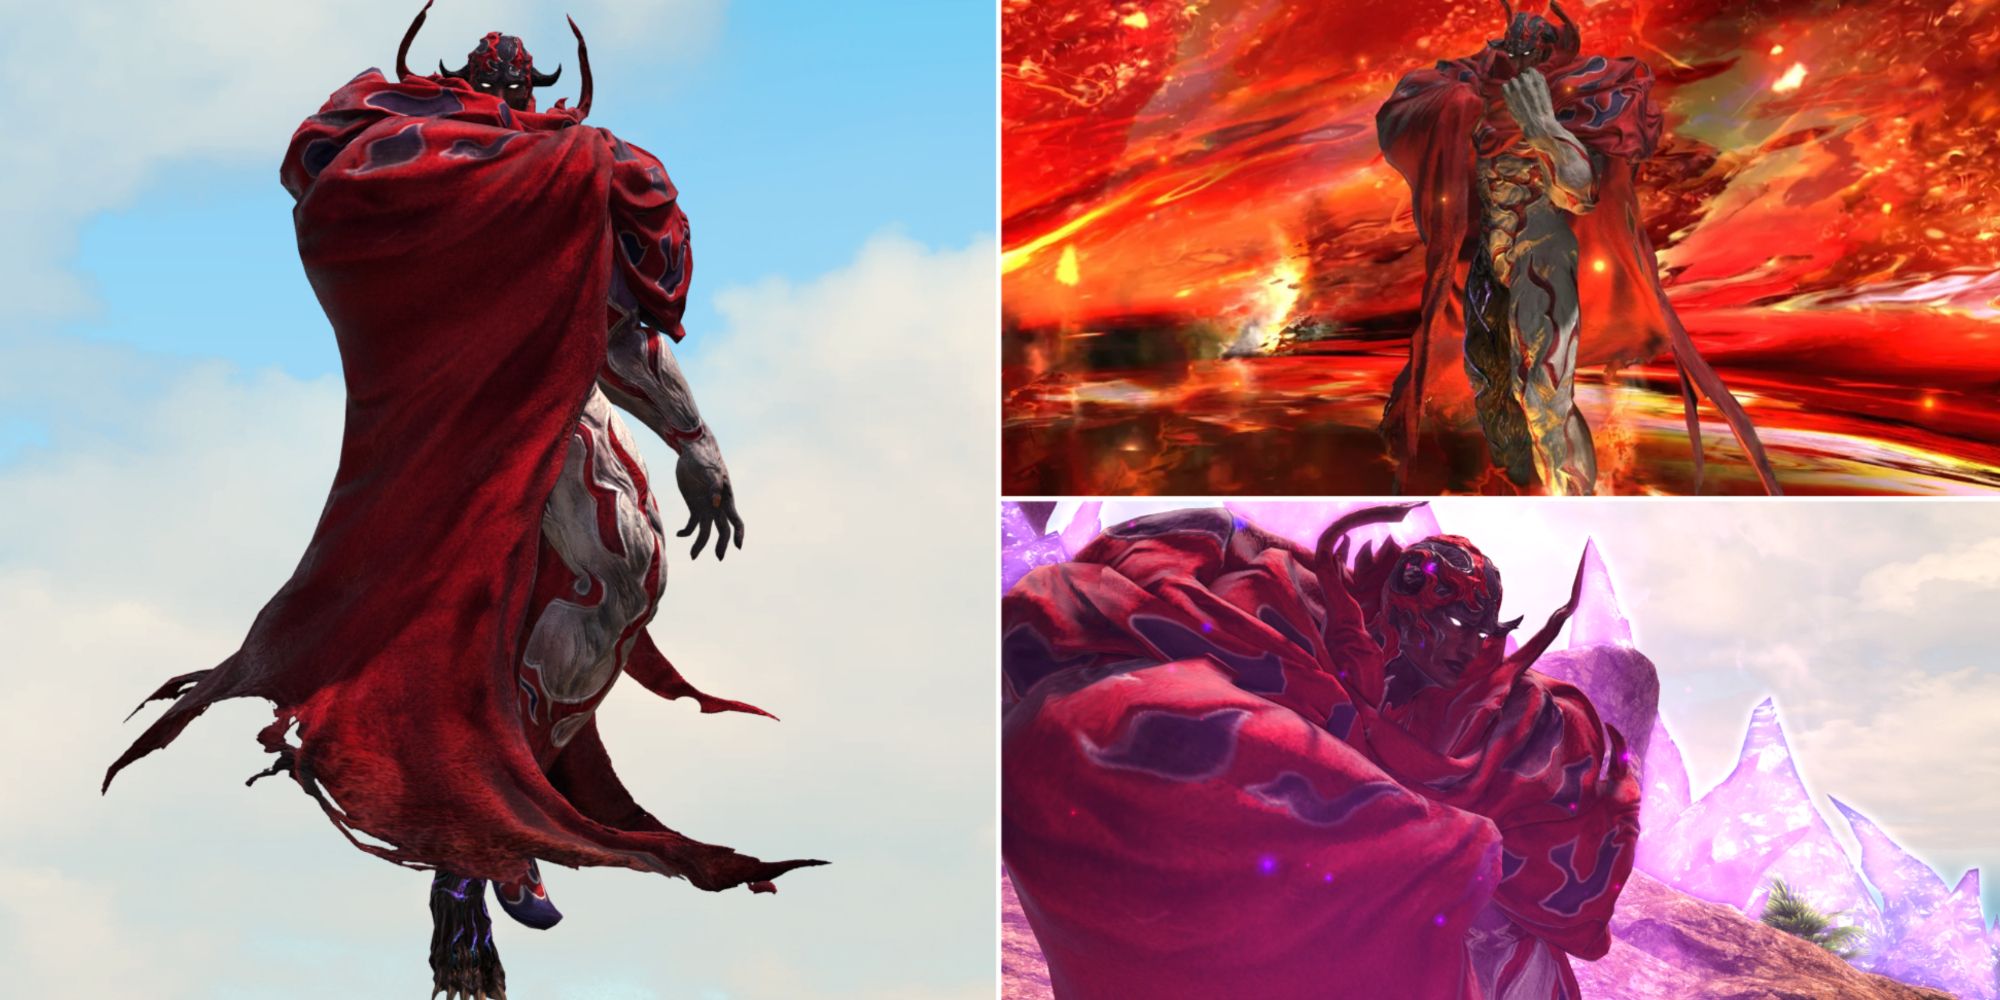 A collage of images showcasing the Mount Ordeals Extreme Trial Boss, Rubicante, in Final Fantasy 14. Rubicante is an arch demon with a large red cloak, horns, and sharp claws on his feet.